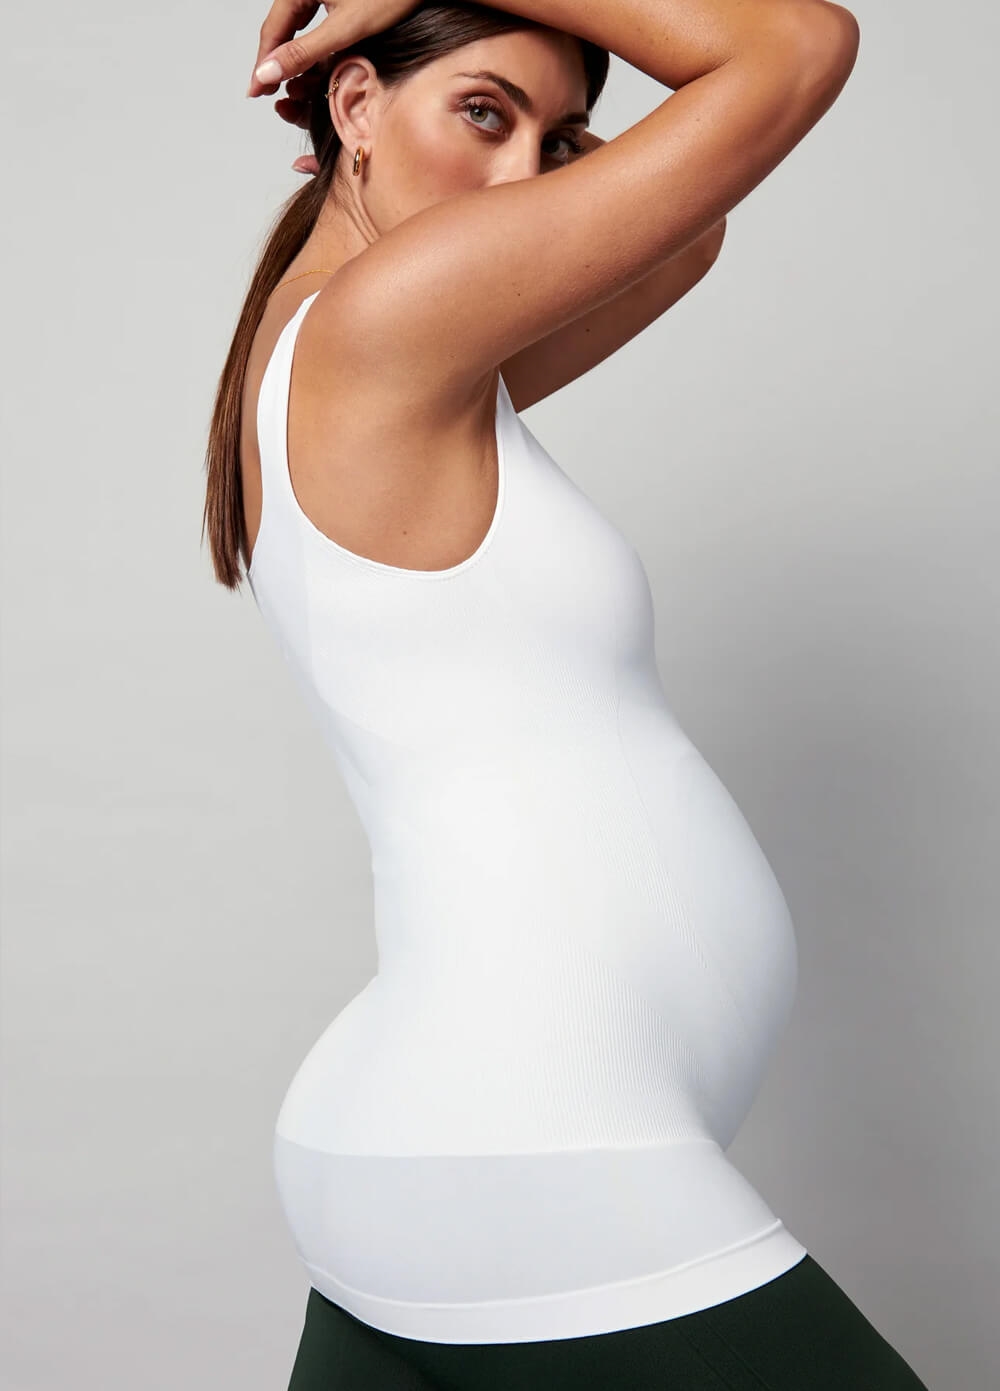 BLANQI Everyday Maternity Built-In Support BellyBand